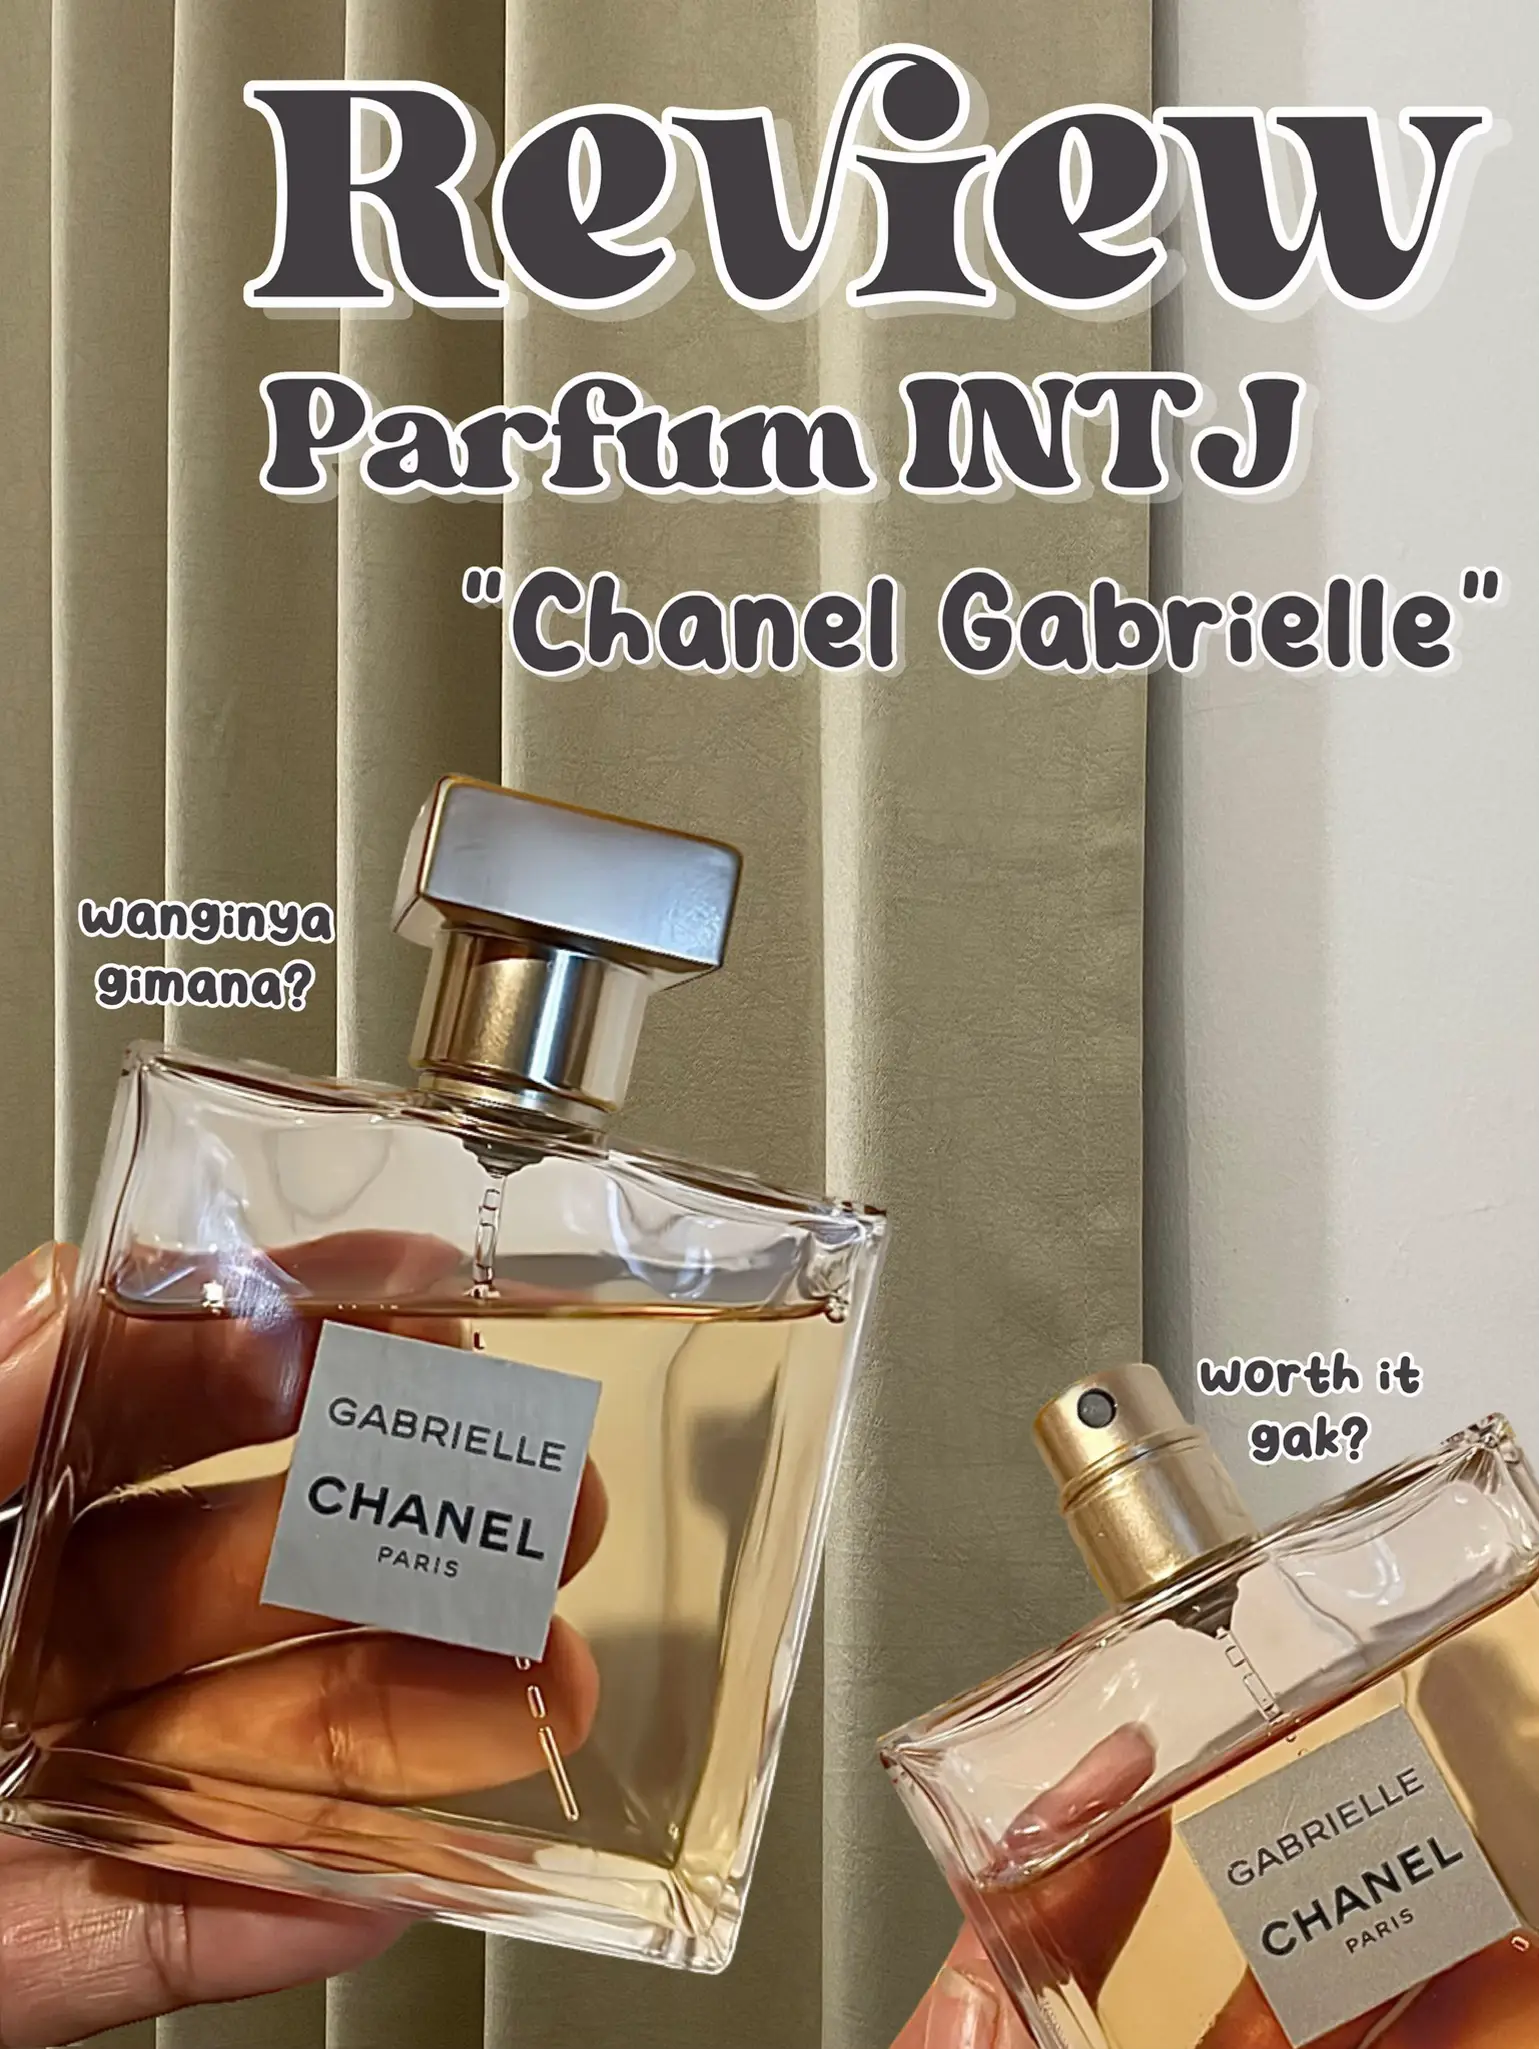 SAVE] Review Parfum INTJ Chanel Gabrielle 🖤⚜️, Gallery posted by Putri  A.